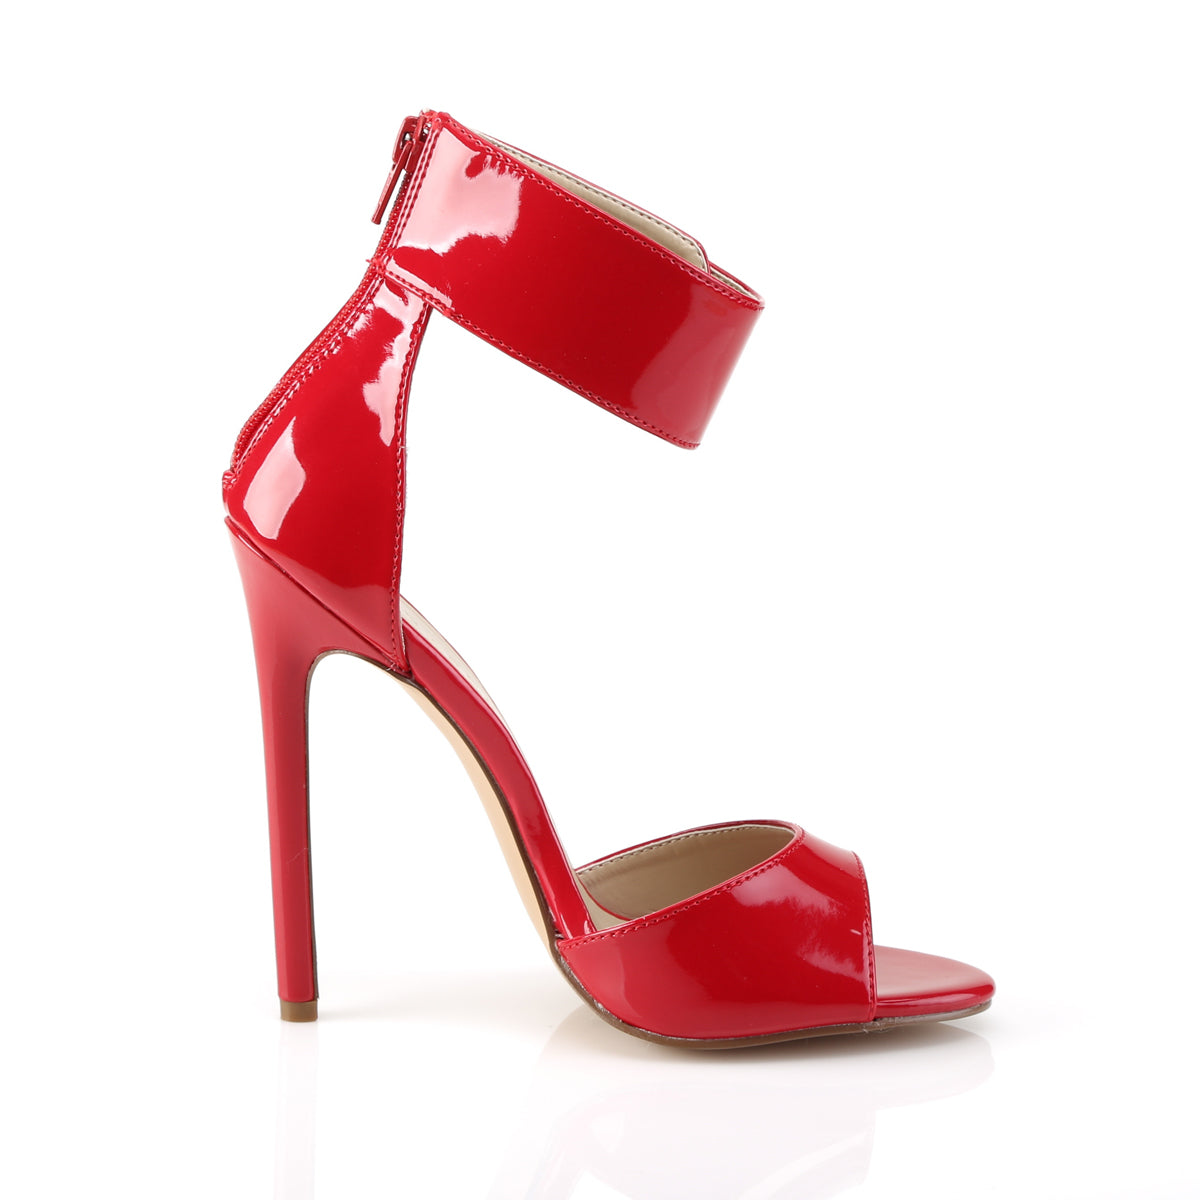 SEXY-19 Pleaser Shoes 5 Inch Heel Red Fetish Footwear-Pleaser- Sexy Shoes Fetish Heels